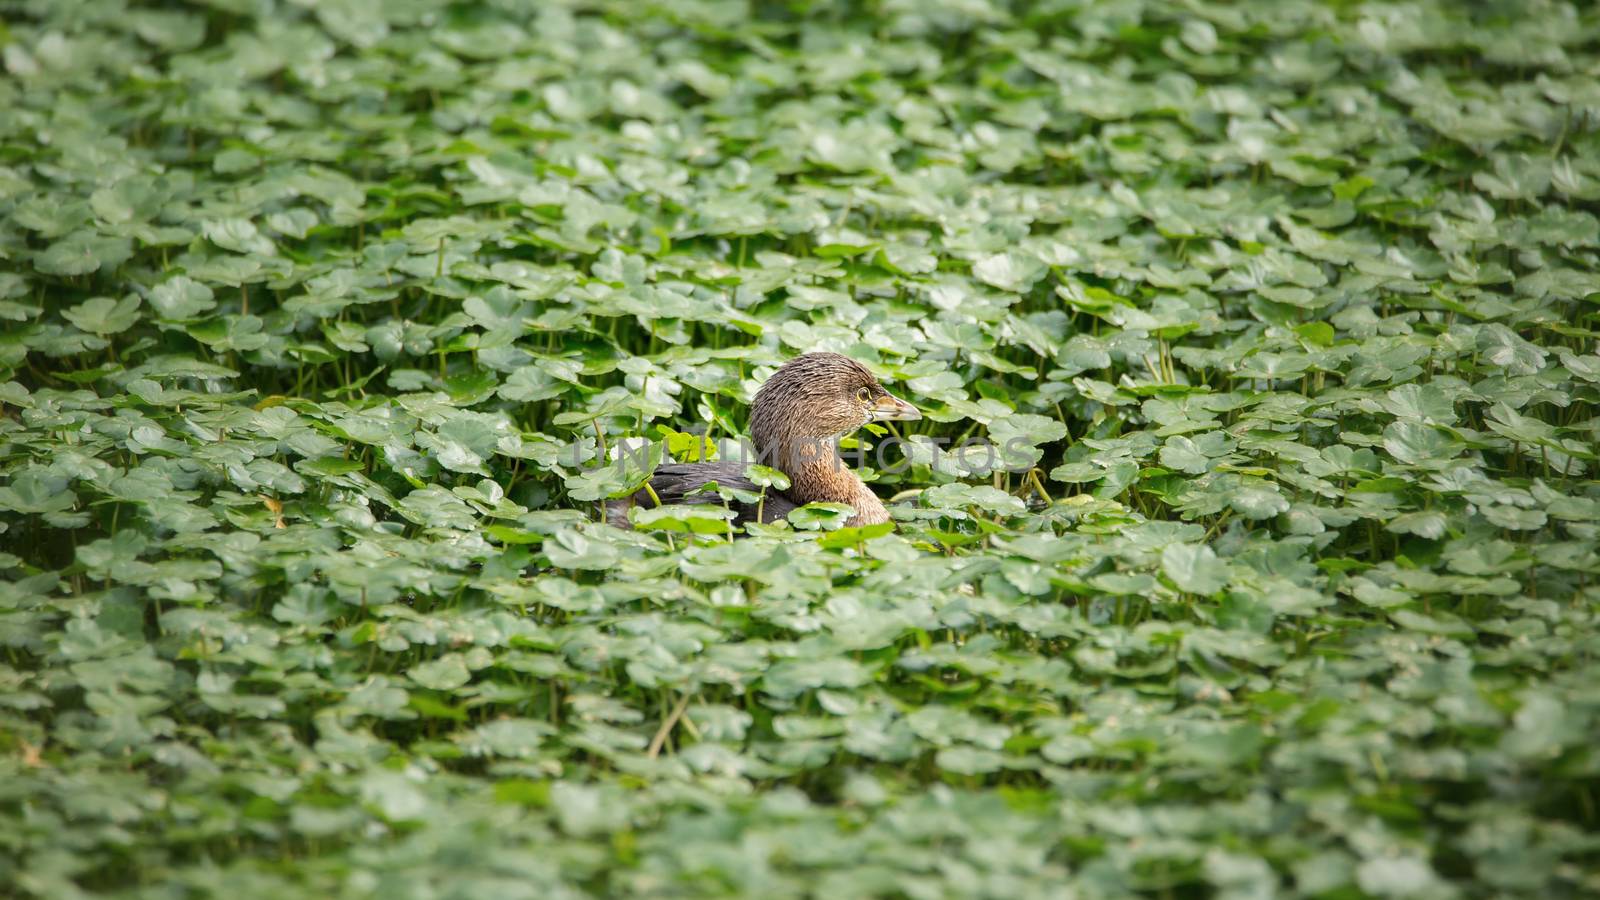 Juvenile Coot Swimming in a Pond by backyard_photography